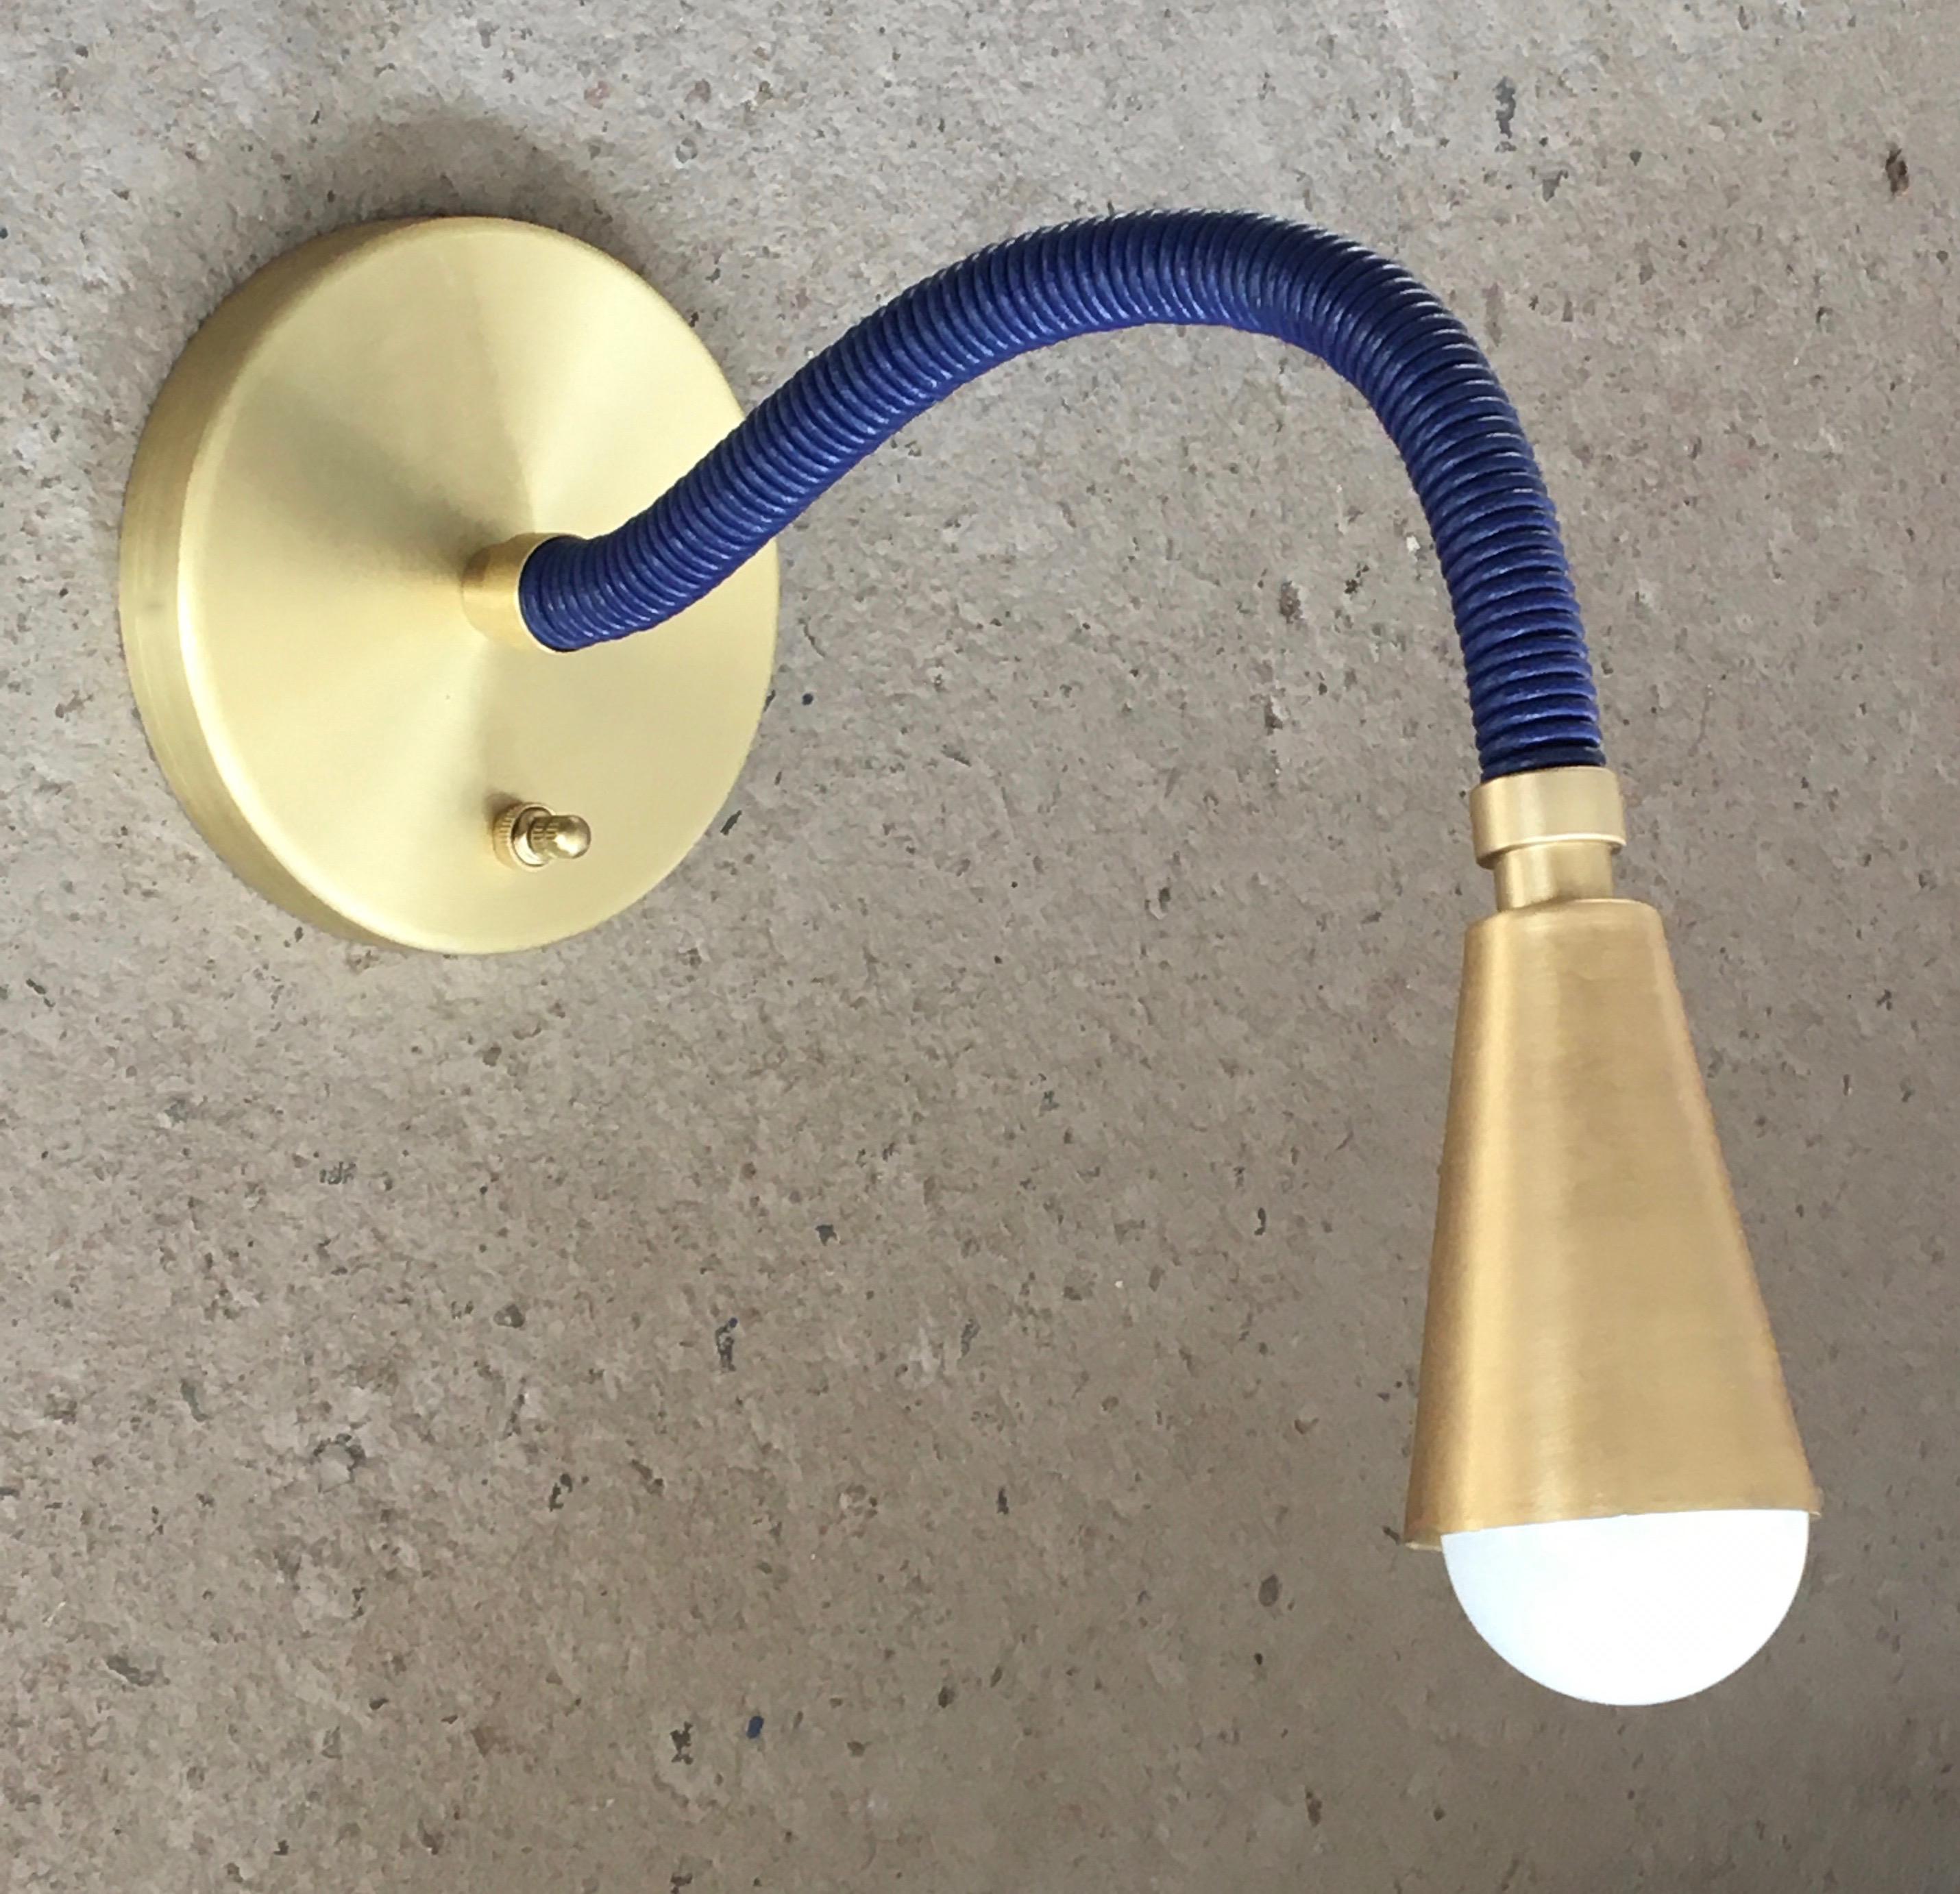 Avantgarden's custom made adjustable arm reading wall sconce. 
Choose from over 20 custom leather colors
Arm lengths come in 12